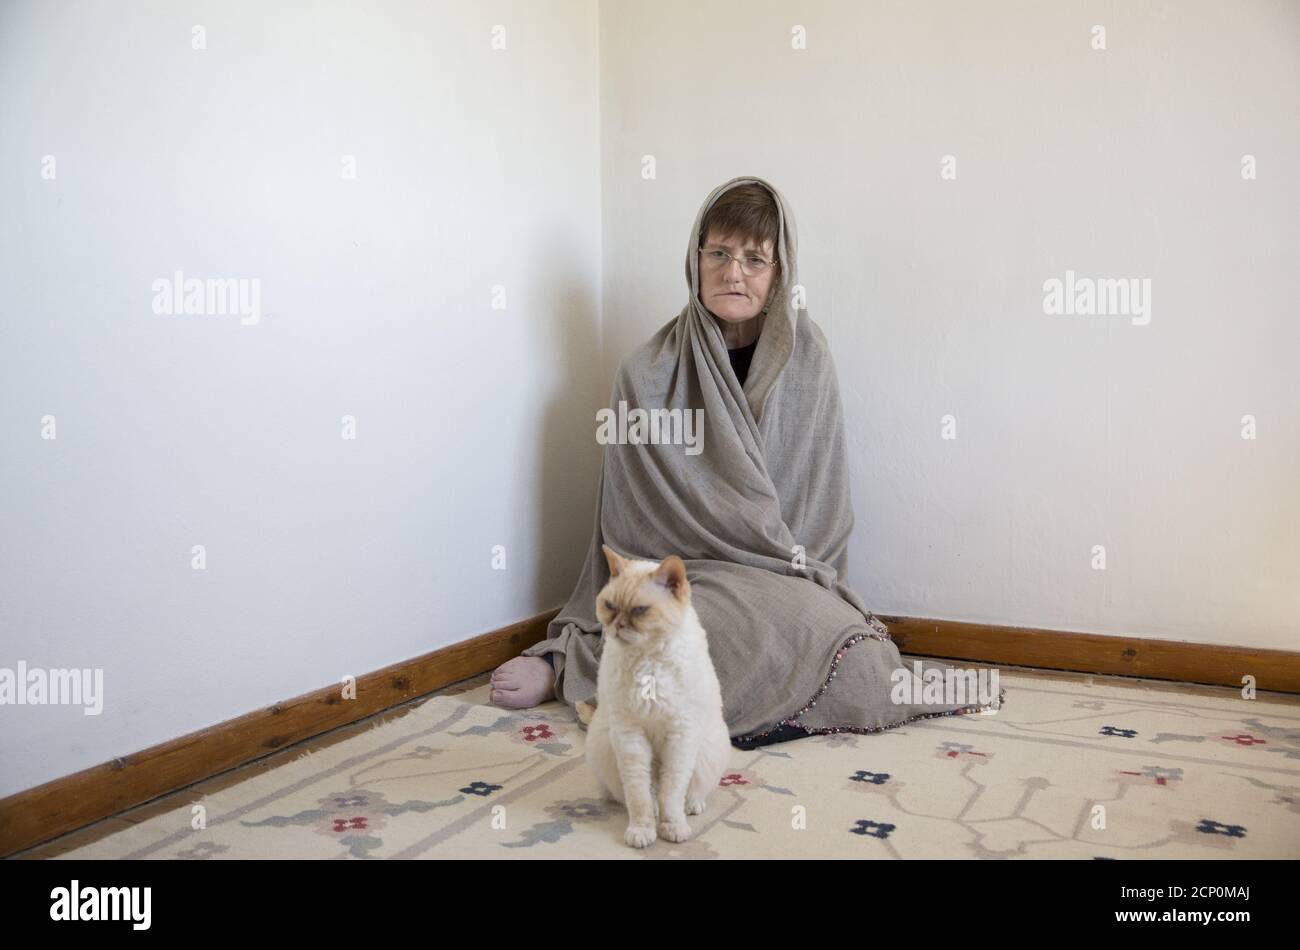 Sister Rachel Denton sits with a cat in St Cuthbert's Hermitage in Lincolnshire, north east Britain April 27, 2015. Denton, a Catholic hermit, rises early to tend to her vegetable garden, feed her cats and pray. But the former Carmelite nun, who in 2006 pledged to live the rest of her life in solitude, has another chore - to update her Twitter account and check Facebook. 'The myth you often face as a hermit is that you should have a beard and live in a cave. None of which is me,' says the ex-teacher. For the modern-day hermit, she says social media is vital: 'tweets are rare, but precious,' sh Stock Photo